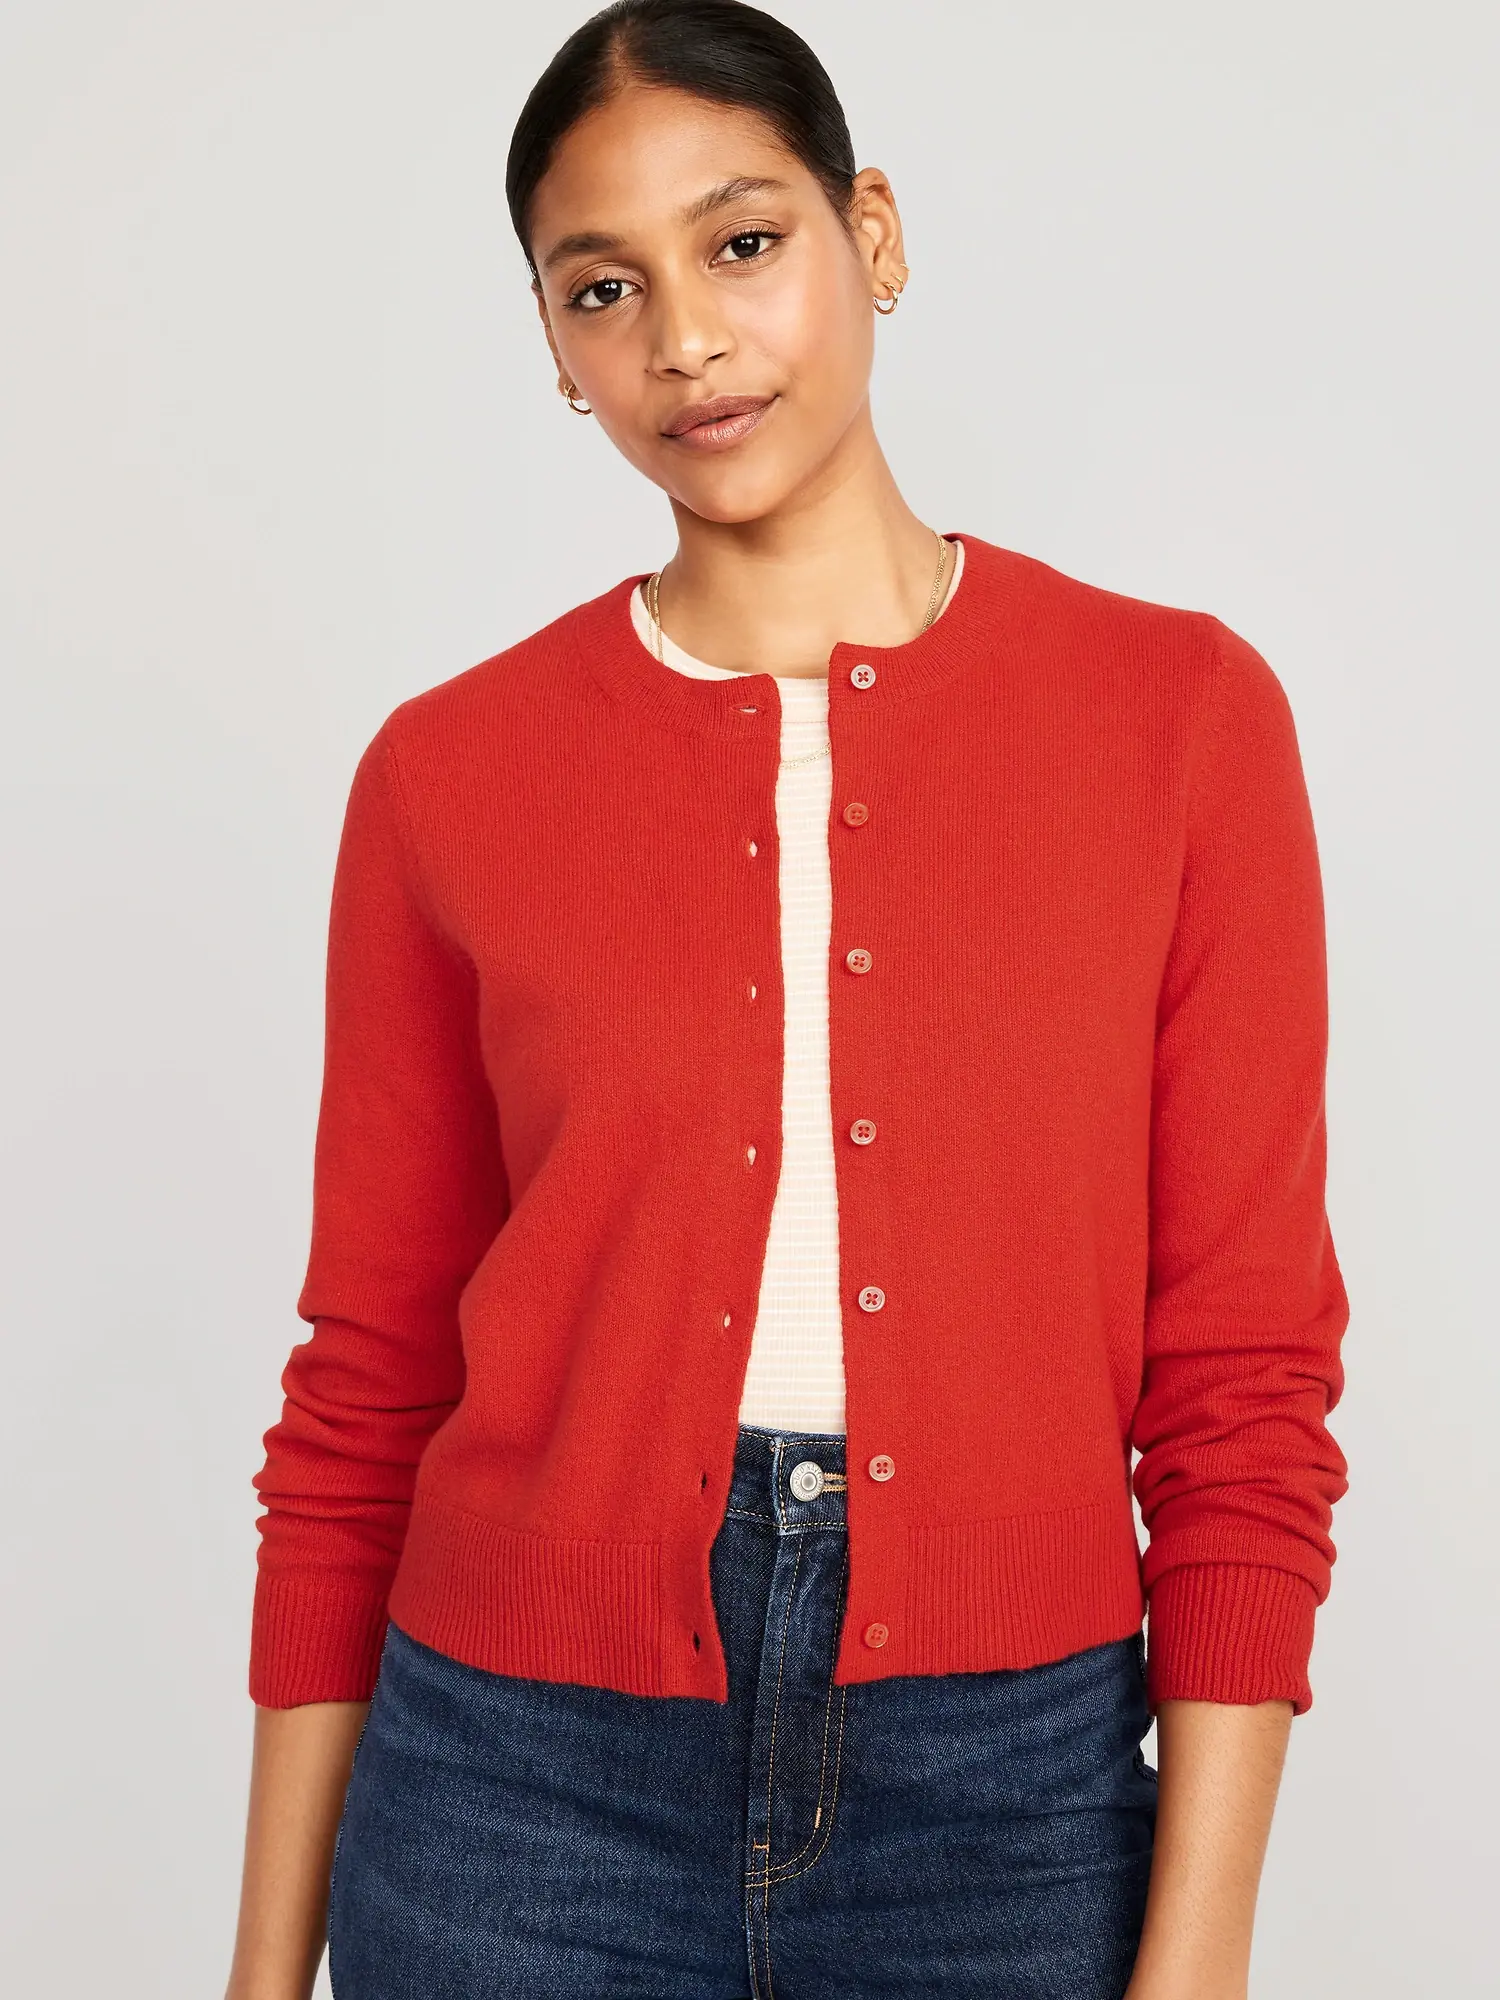 Old Navy SoSoft Cropped Cardigan Sweater for Women red. 1